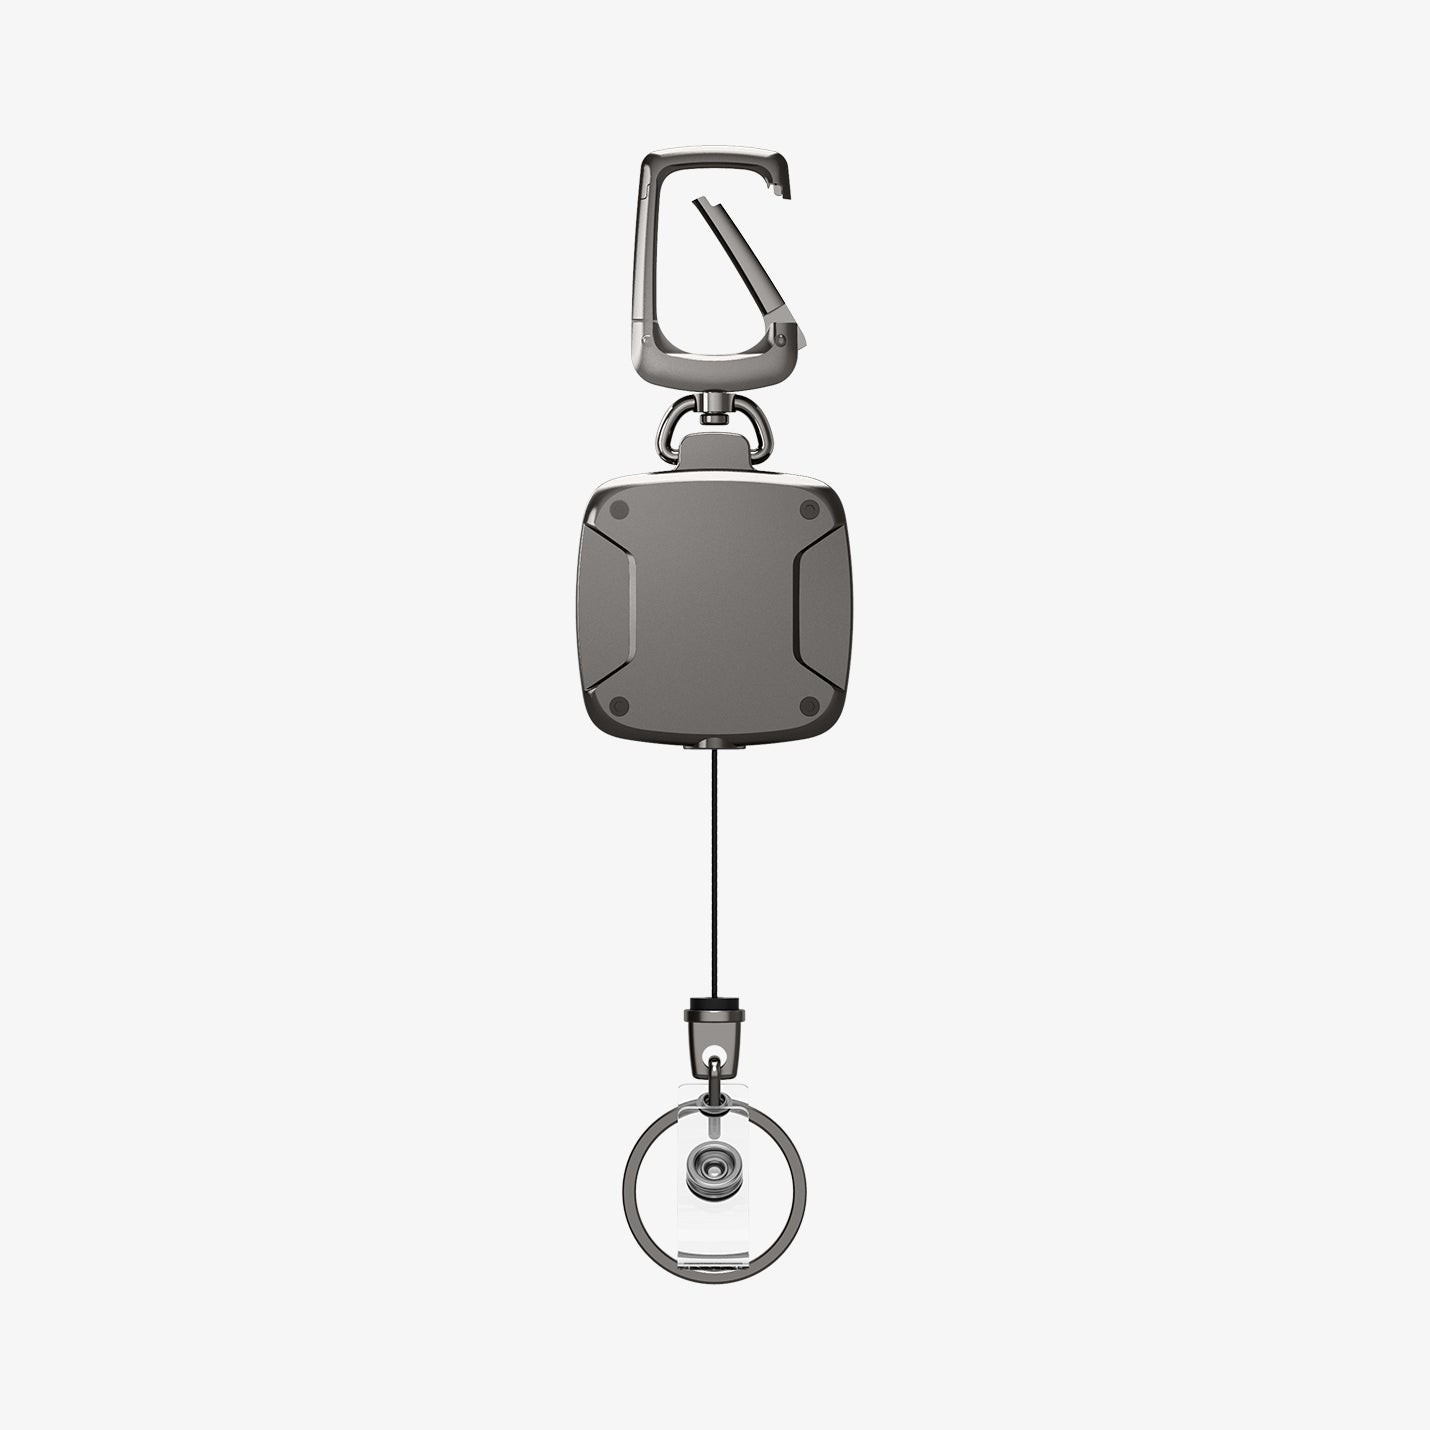 AHP03019 - Carabiner Reel Clip in black showing the back with reel clip extended out slightly and carabiner open